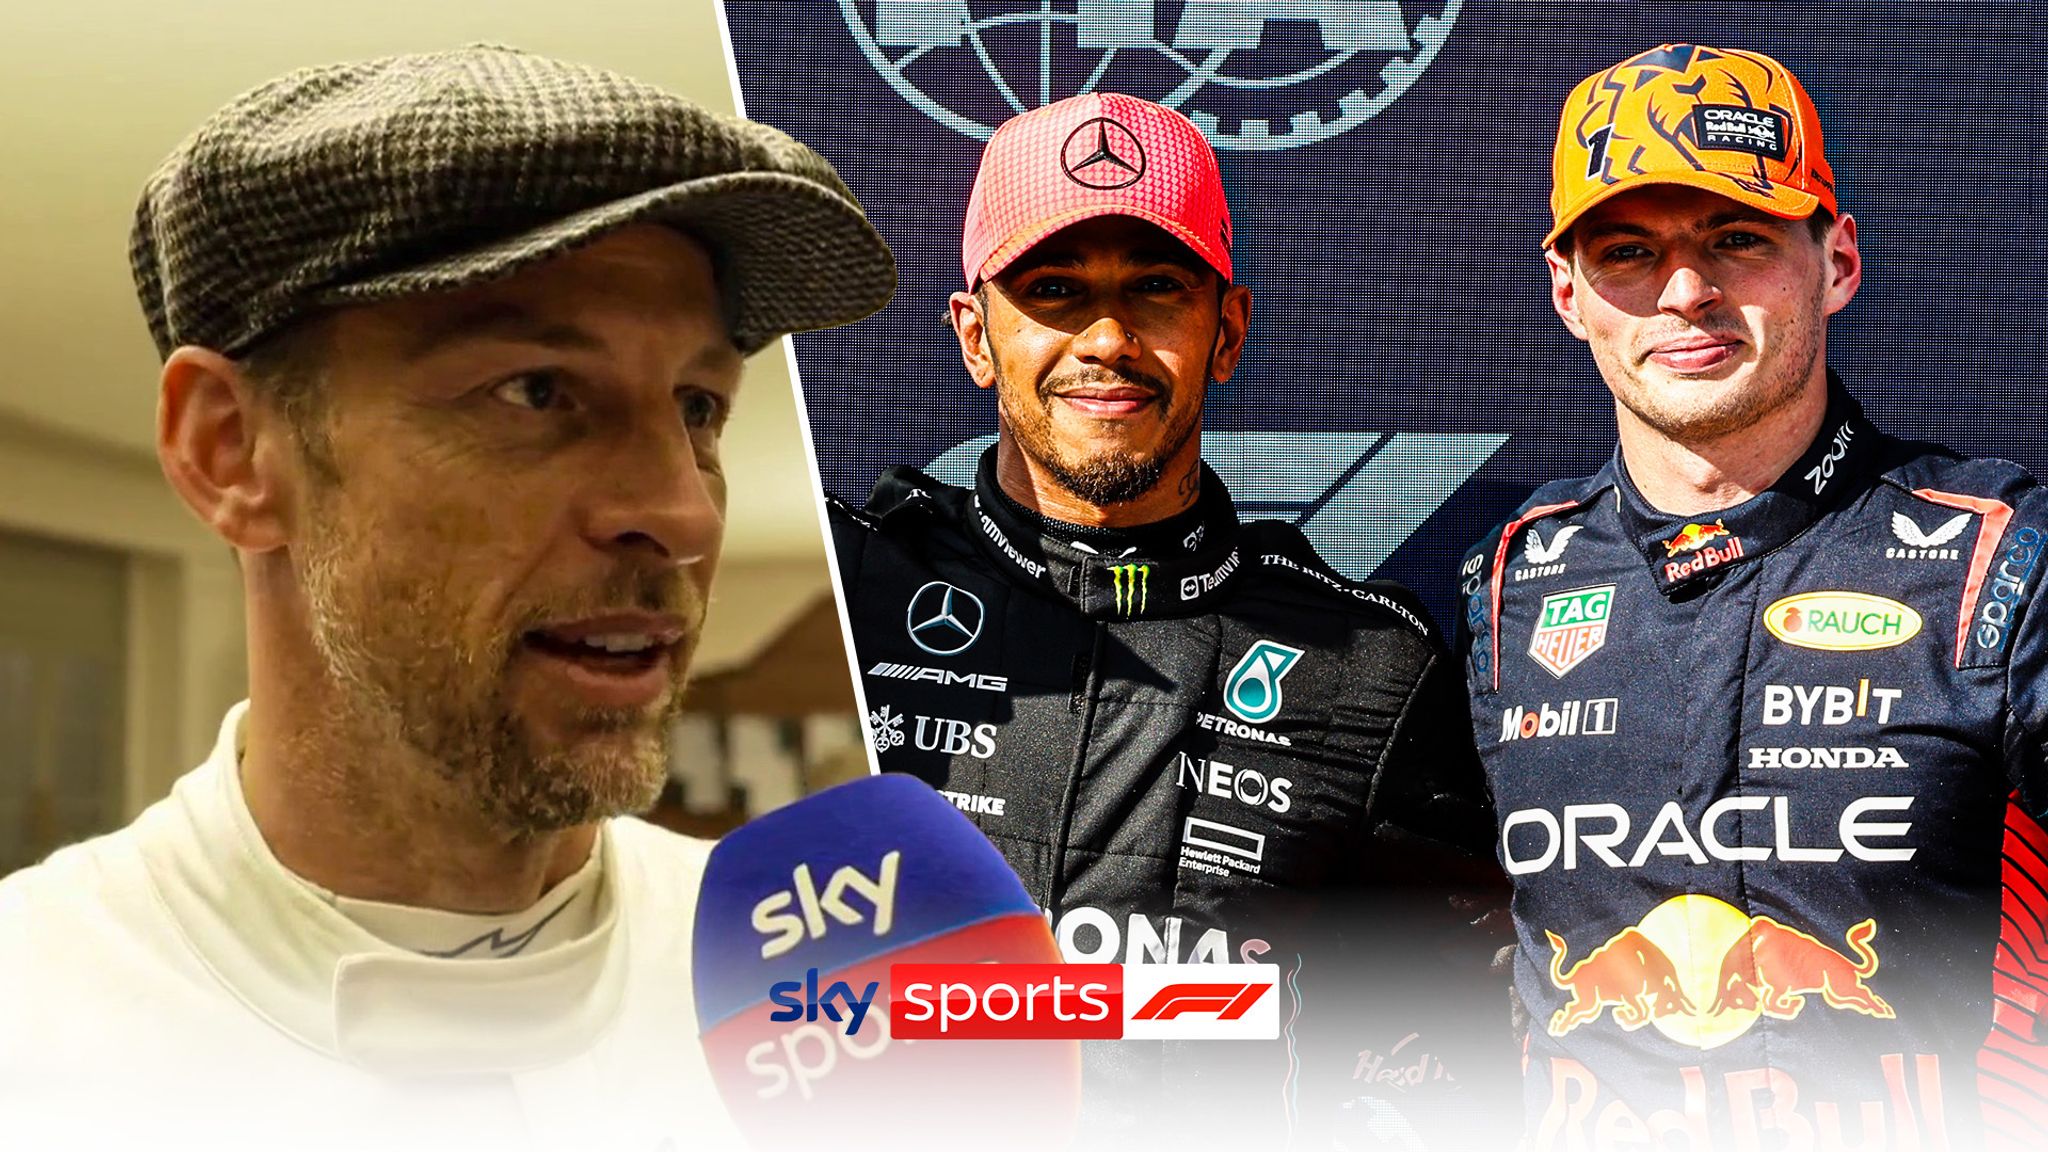 Id be more fearful of Max Jenson Button weighs in on Max Verstappen-Lewis Hamilton debate Video Watch TV Show Sky Sports